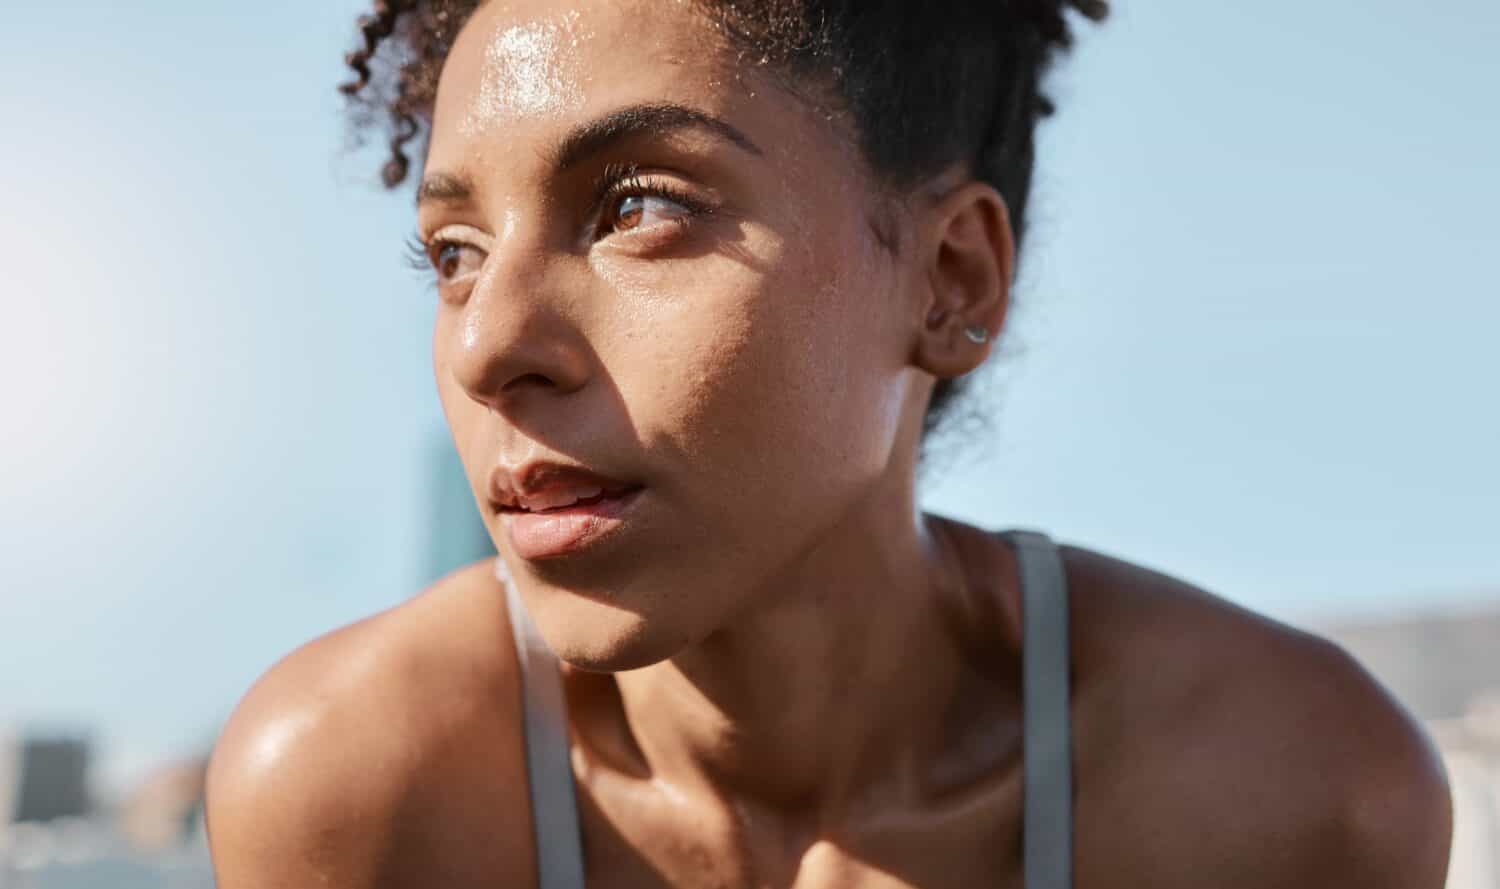 Face, sweat and fitness with a sports black woman tired after a cardio workout for fitness in the city. Running, exhausted and sweating with a female athlete or runner resting after exercise in town